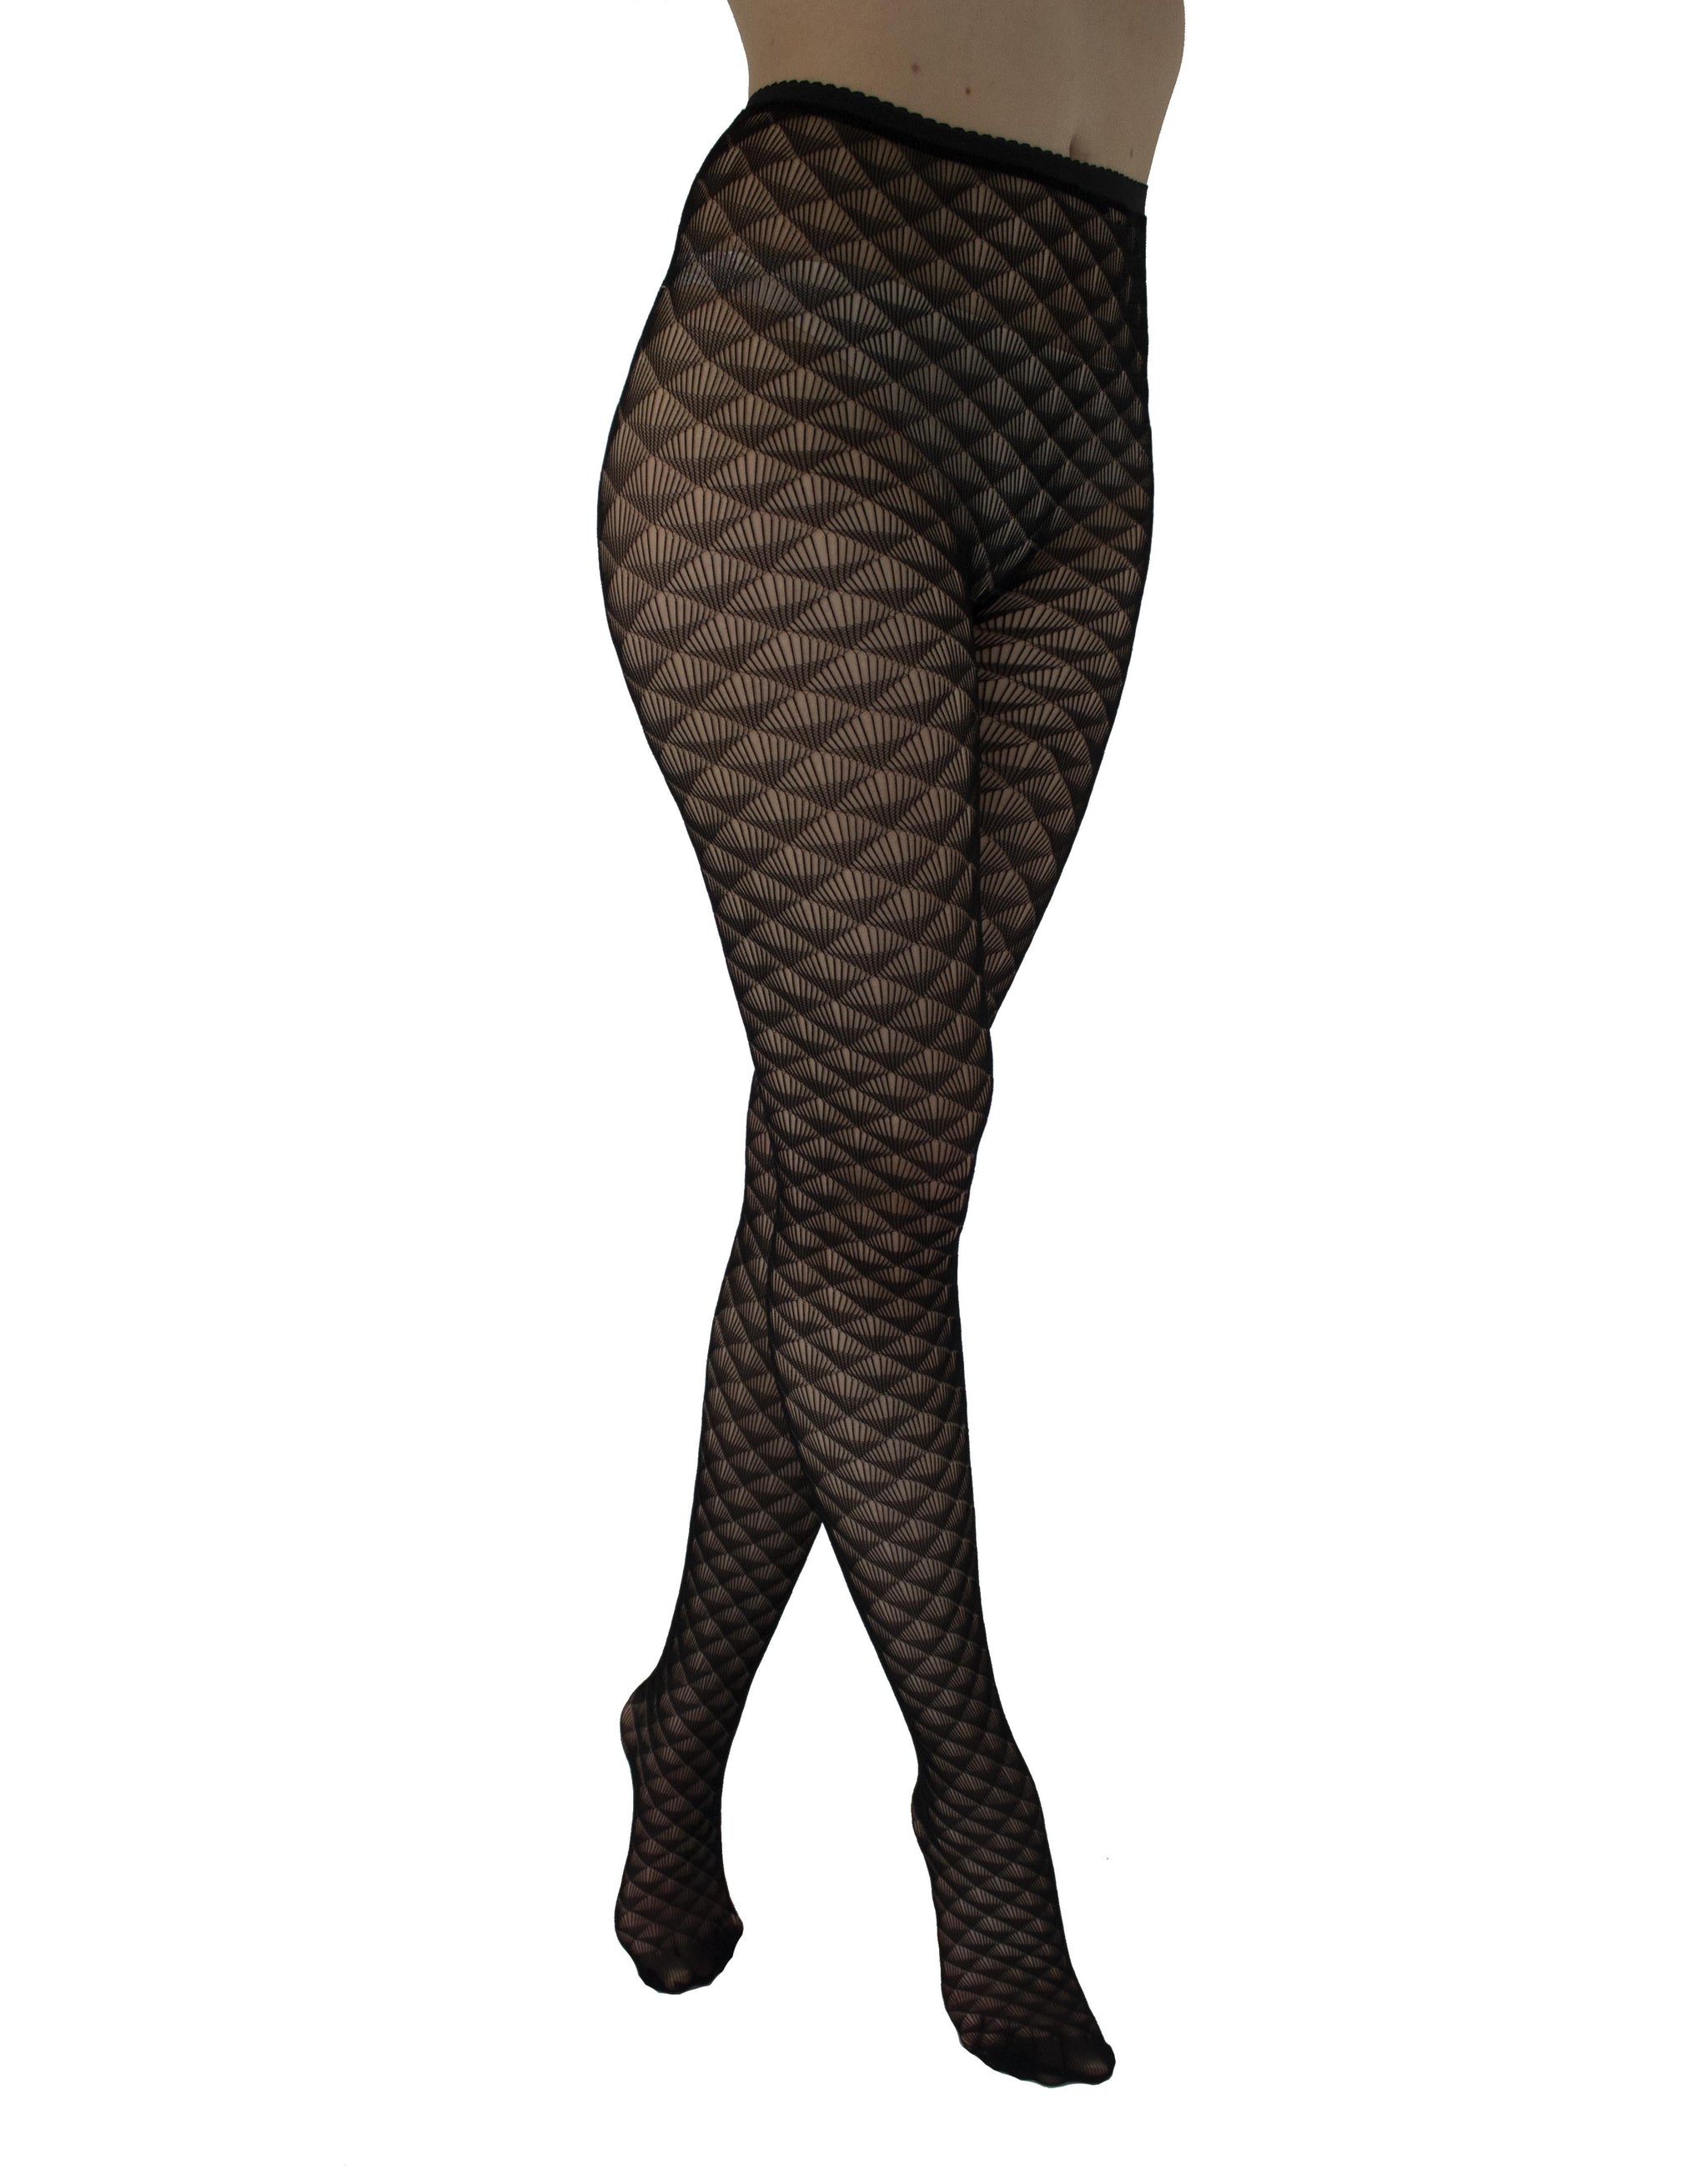 Patchwork Lace Tights, Tights & Hosiery, Women